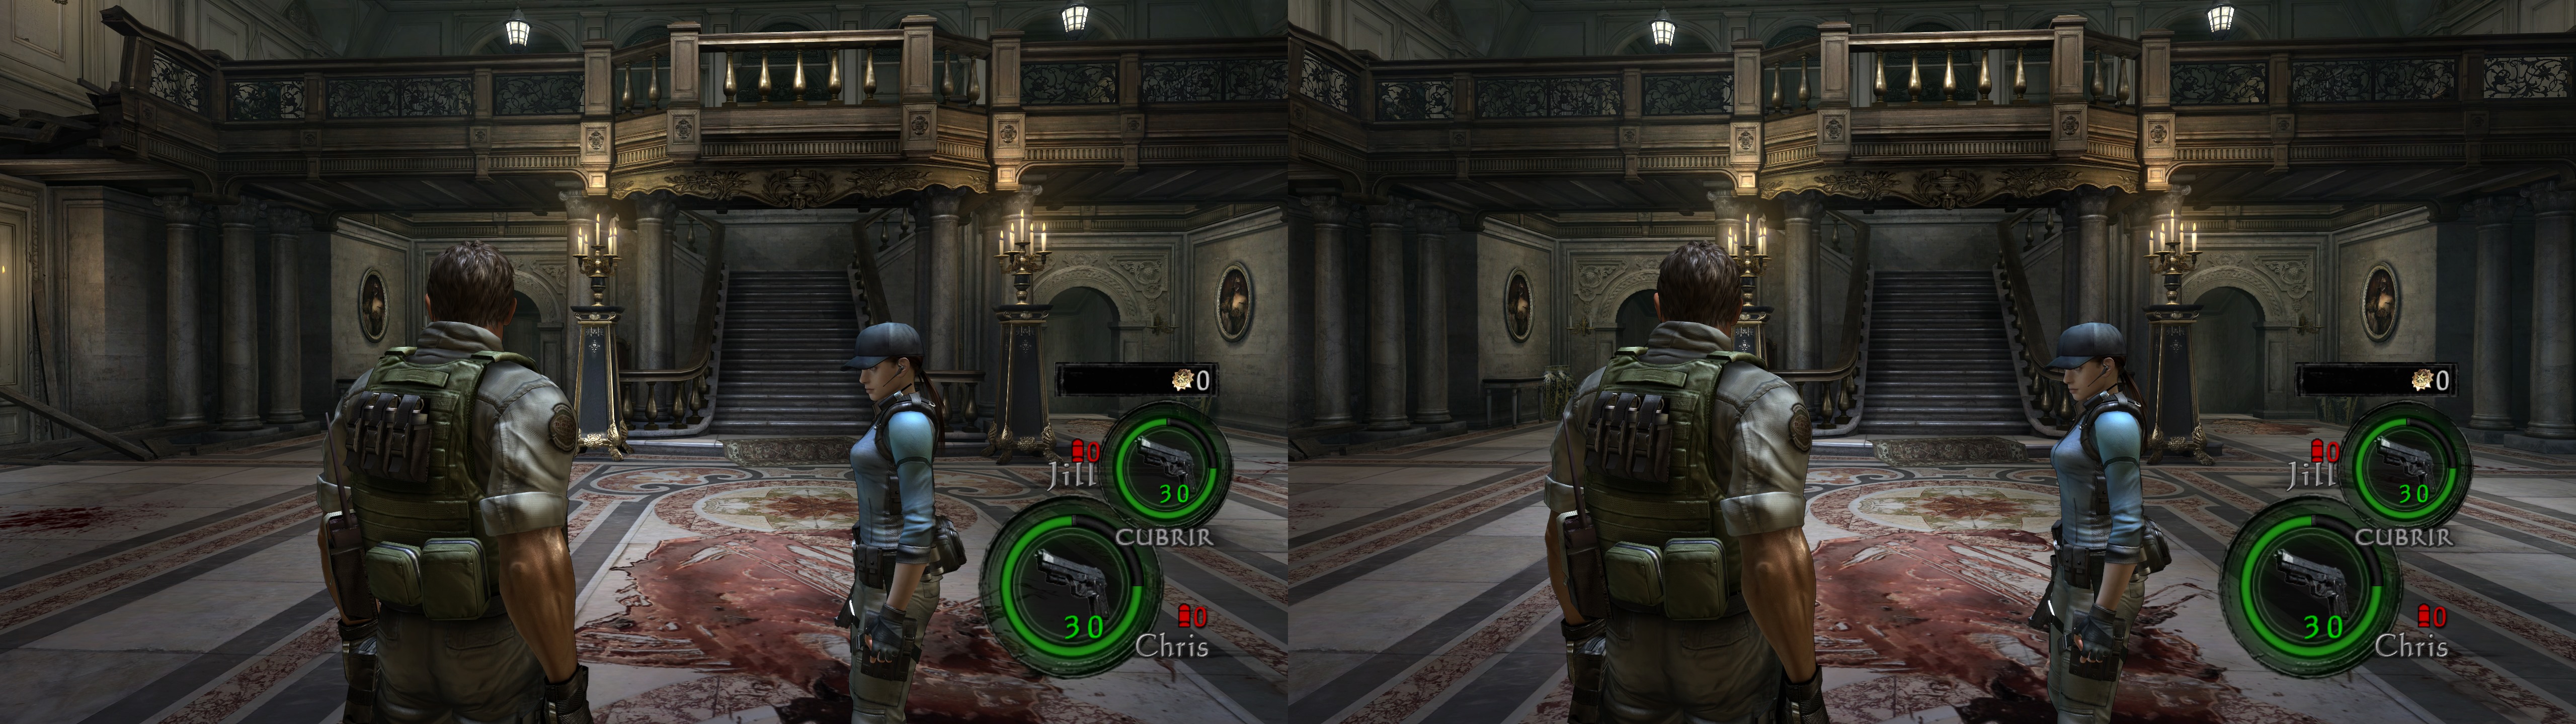 Helix Mod: Resident Evil 5 Gold Edition